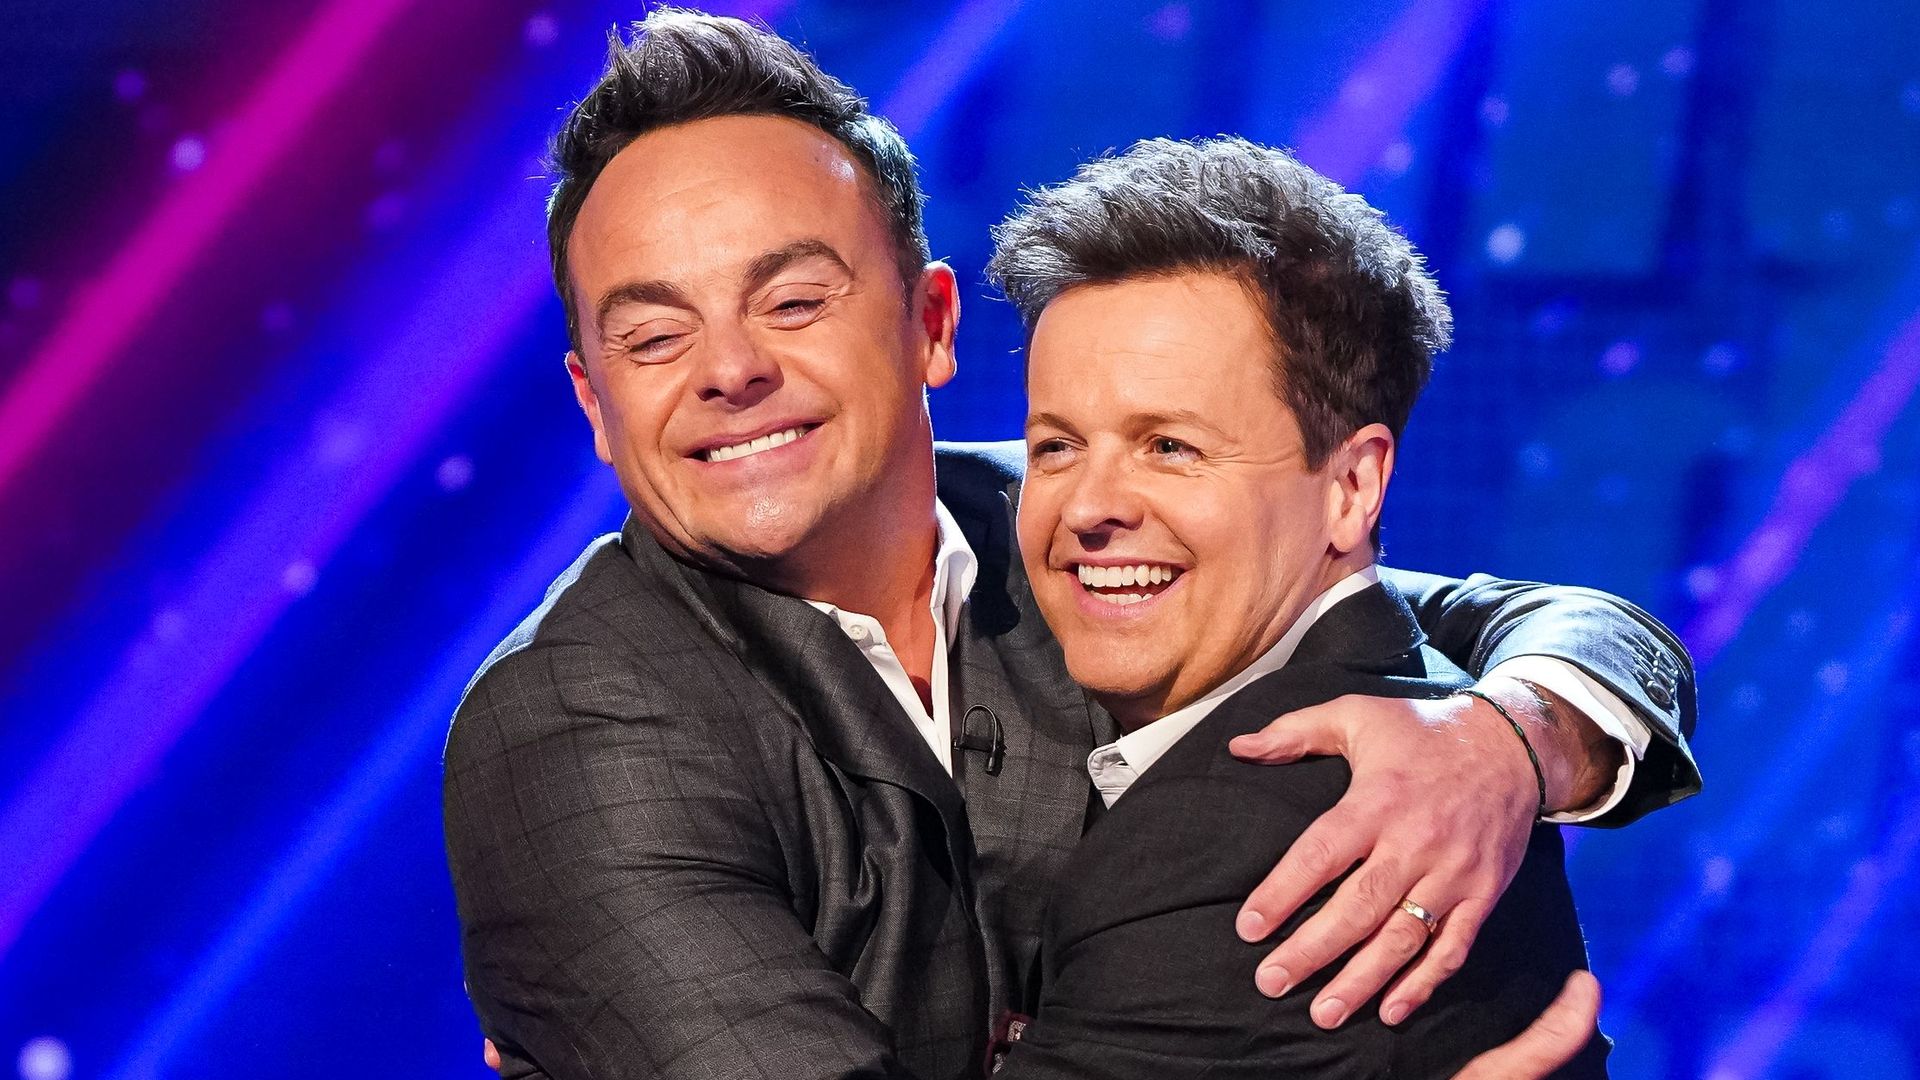 Ant McPartlin and Declan Donelly embracing